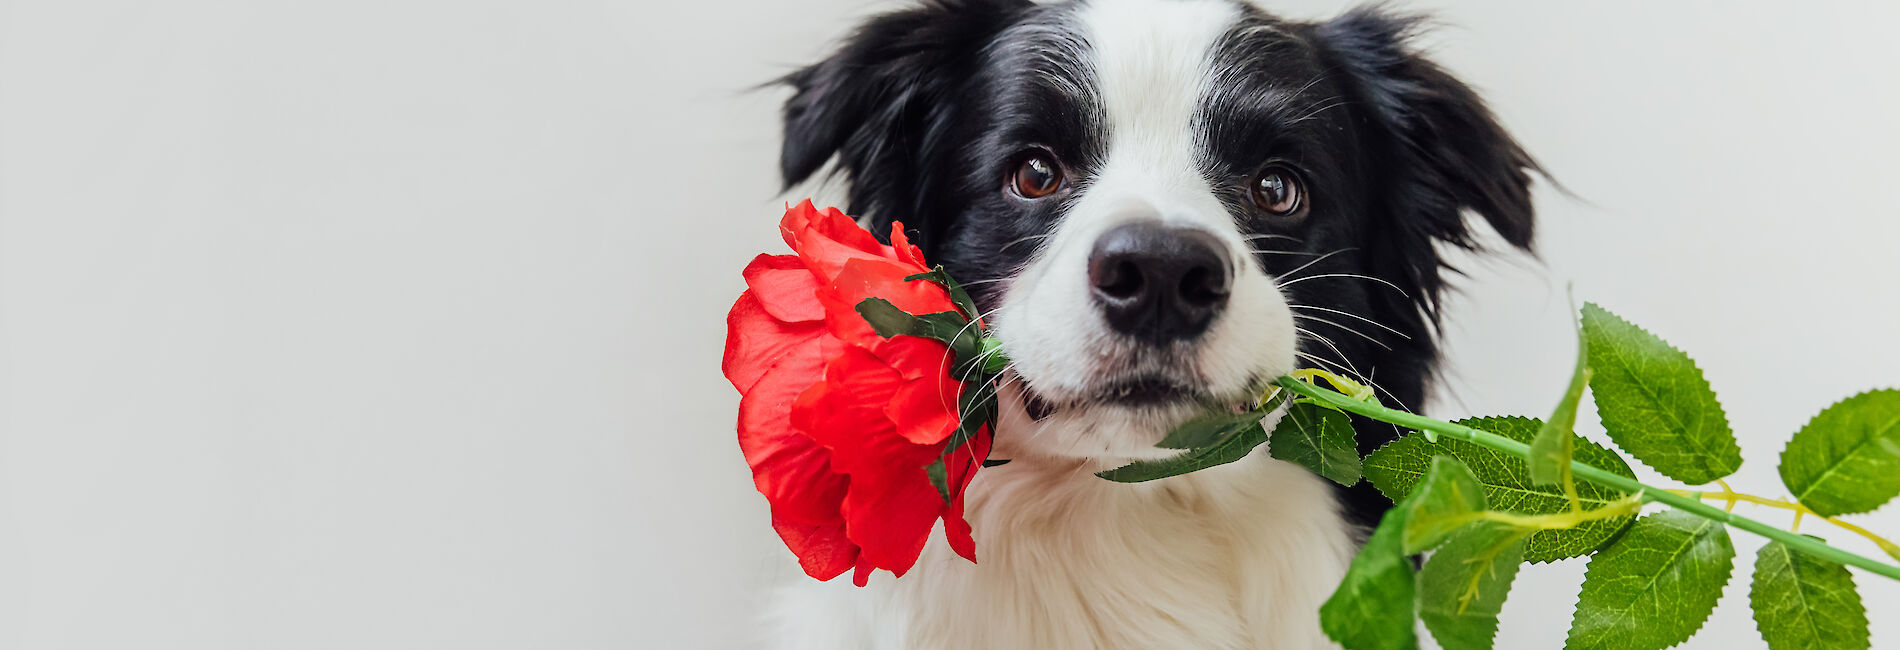 Dog carrying a red rose